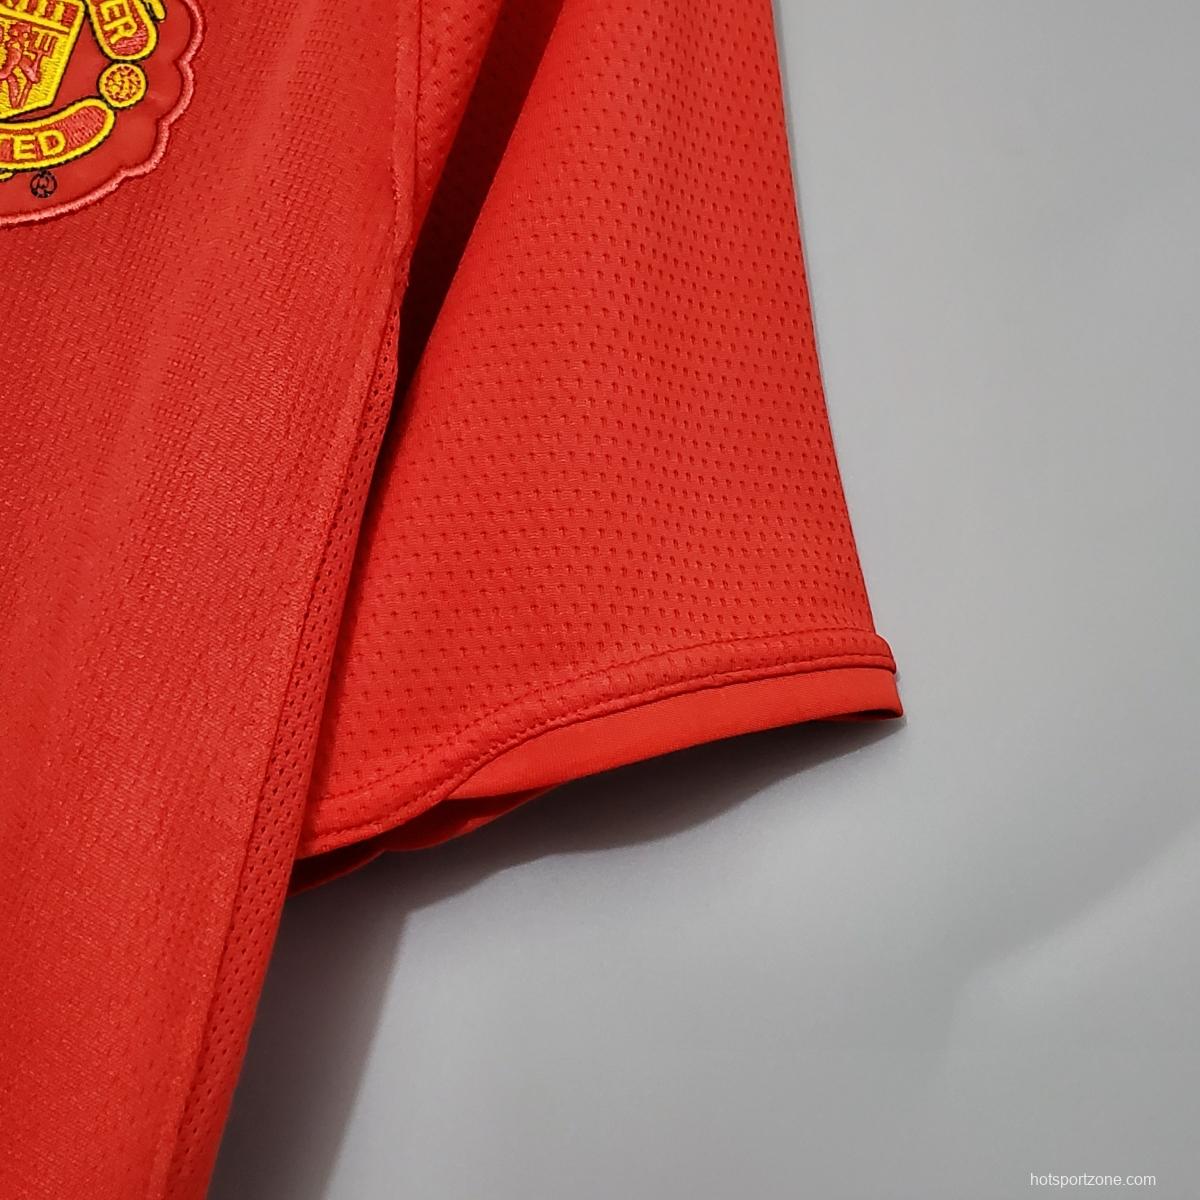 Retro 07/08 Manchester United Champions League version home Soccer Jersey